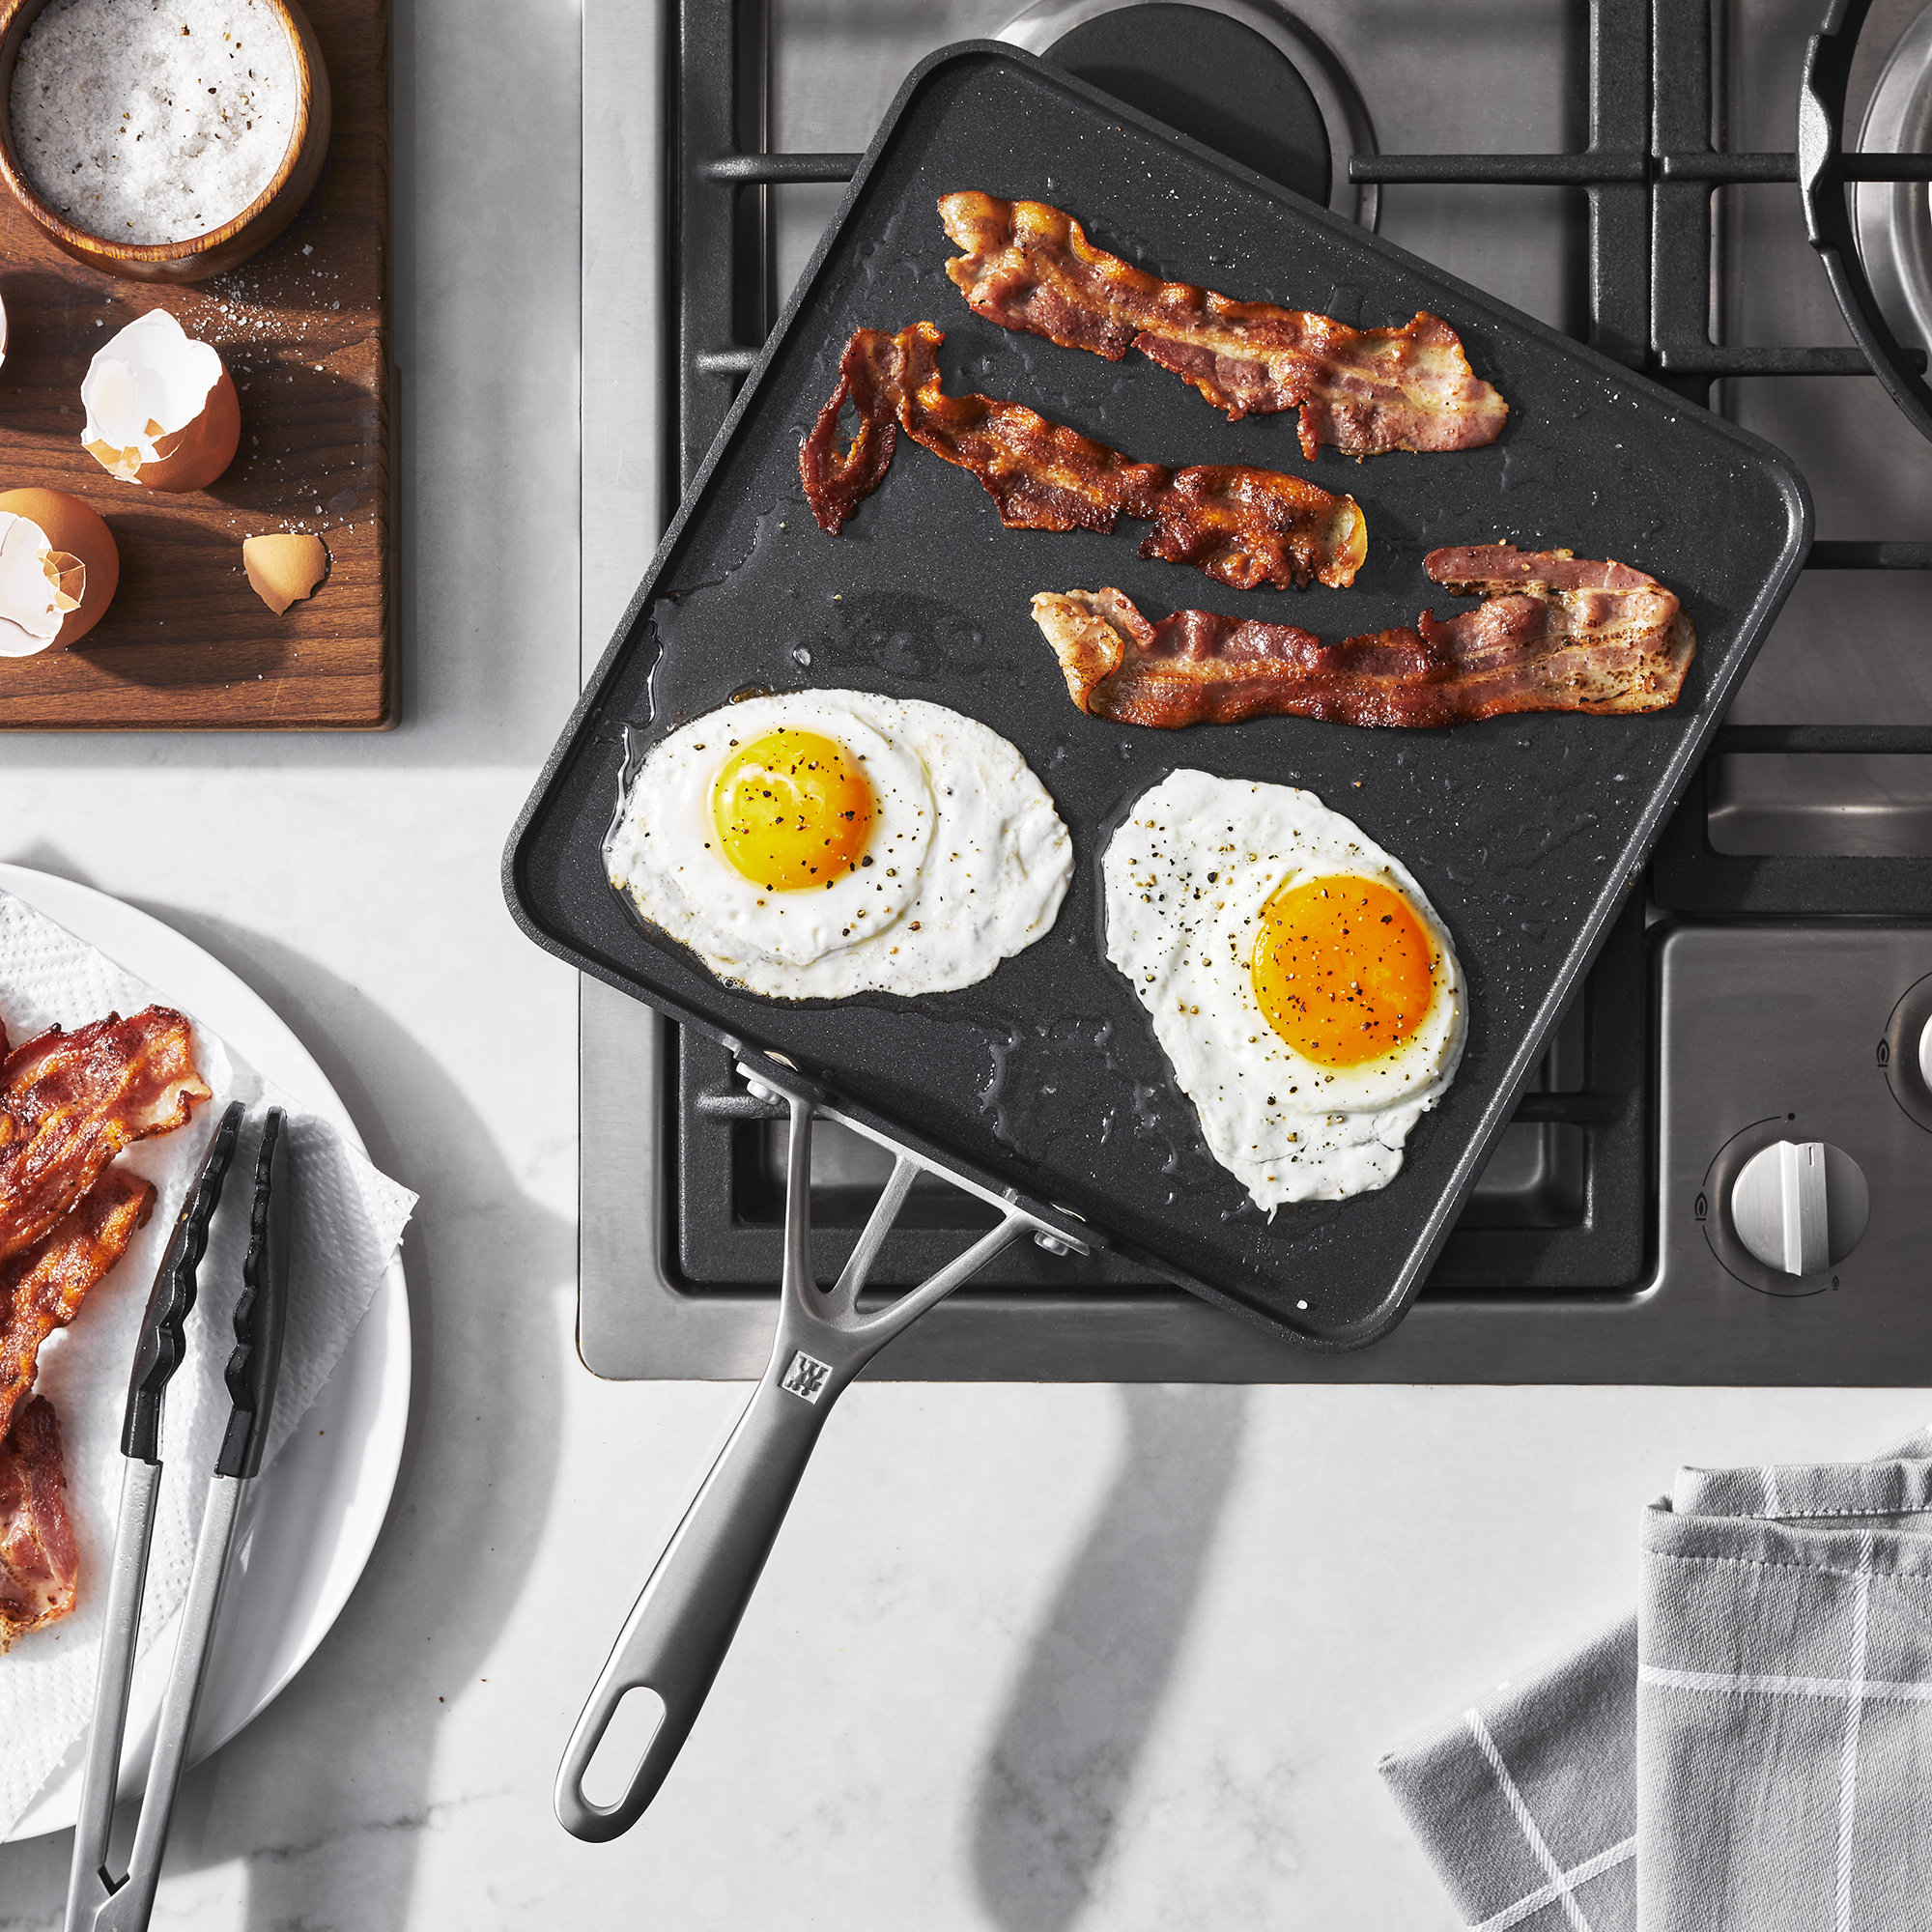 Cuisinart 2-Pack Cast Iron Non-Stick Griddle and Pan Set in the